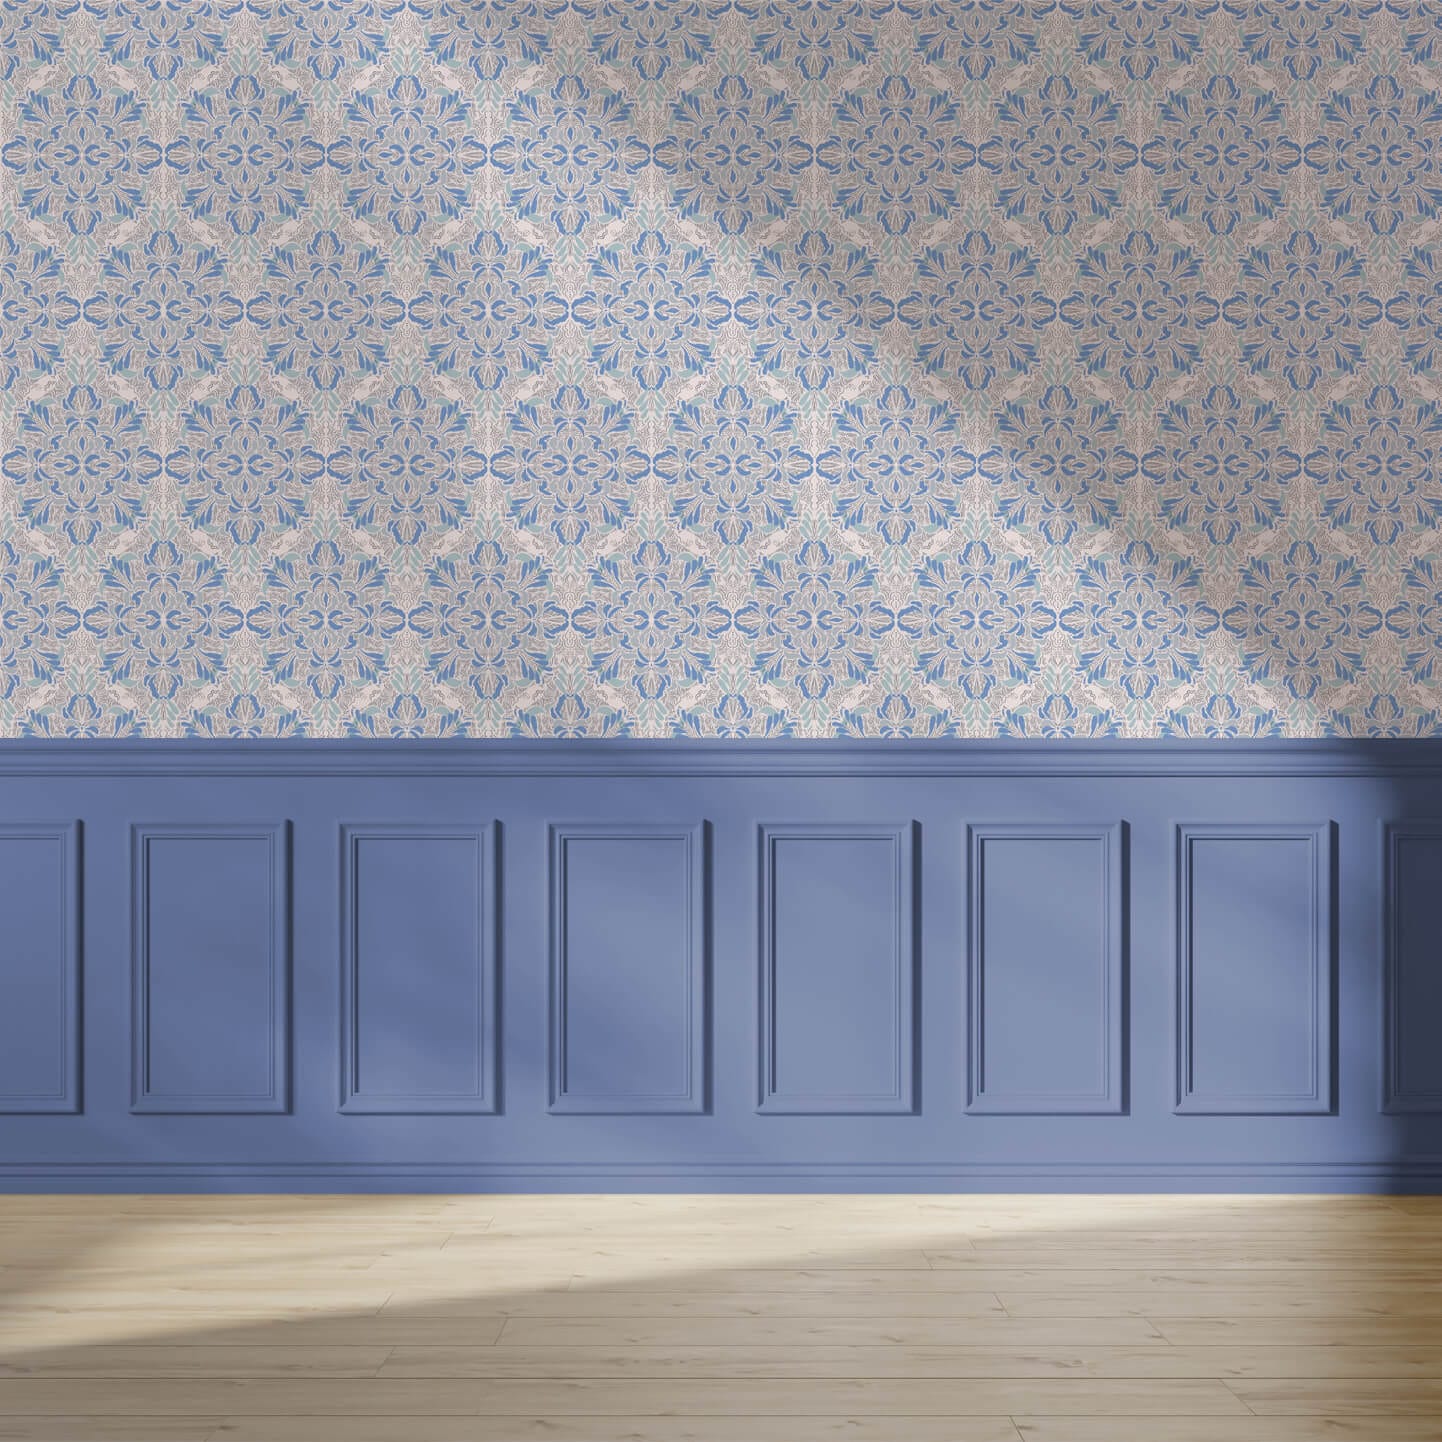 Wallpaper sample of blue and light blue floral pattern.